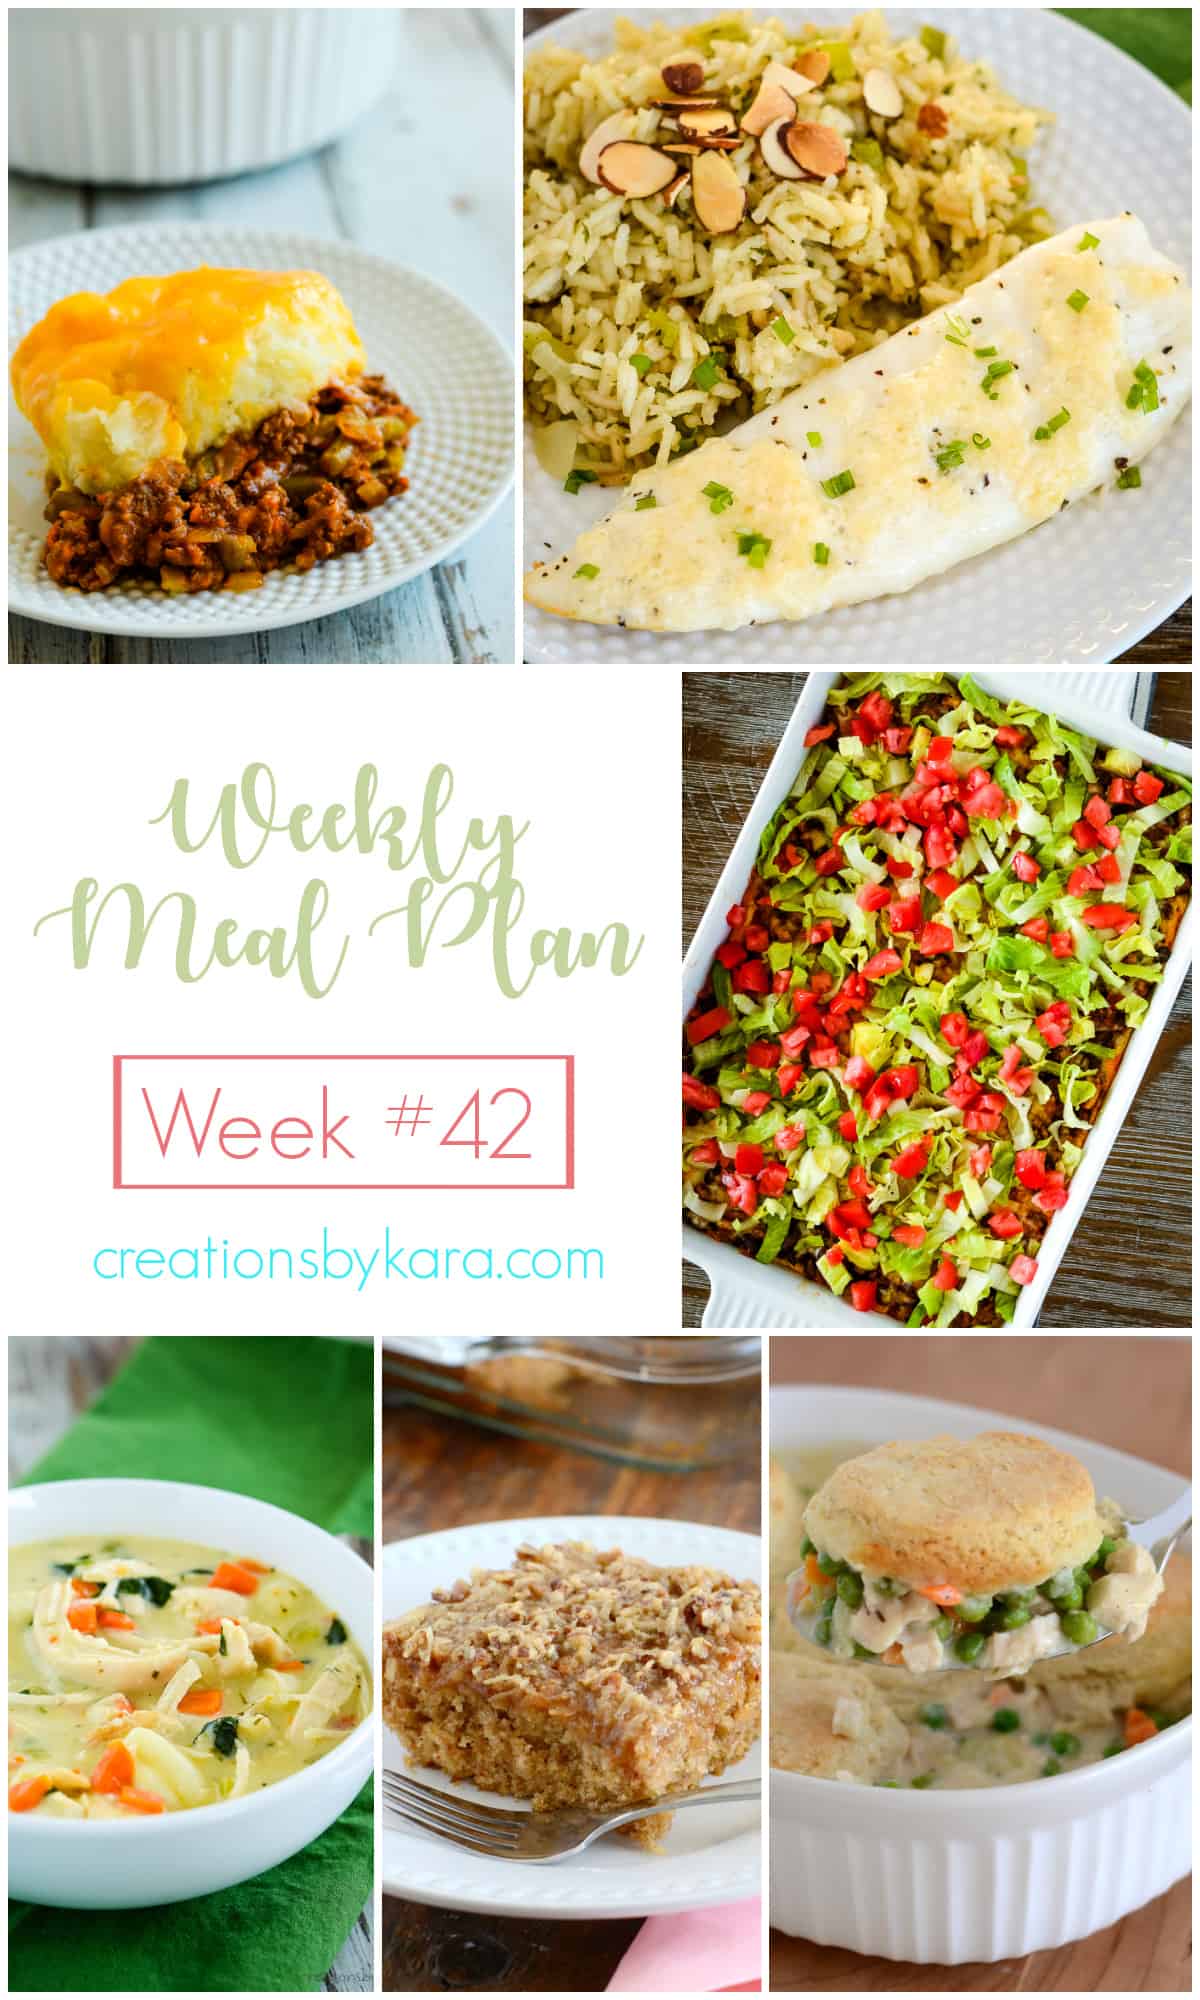 weekly meal plan #42 collage